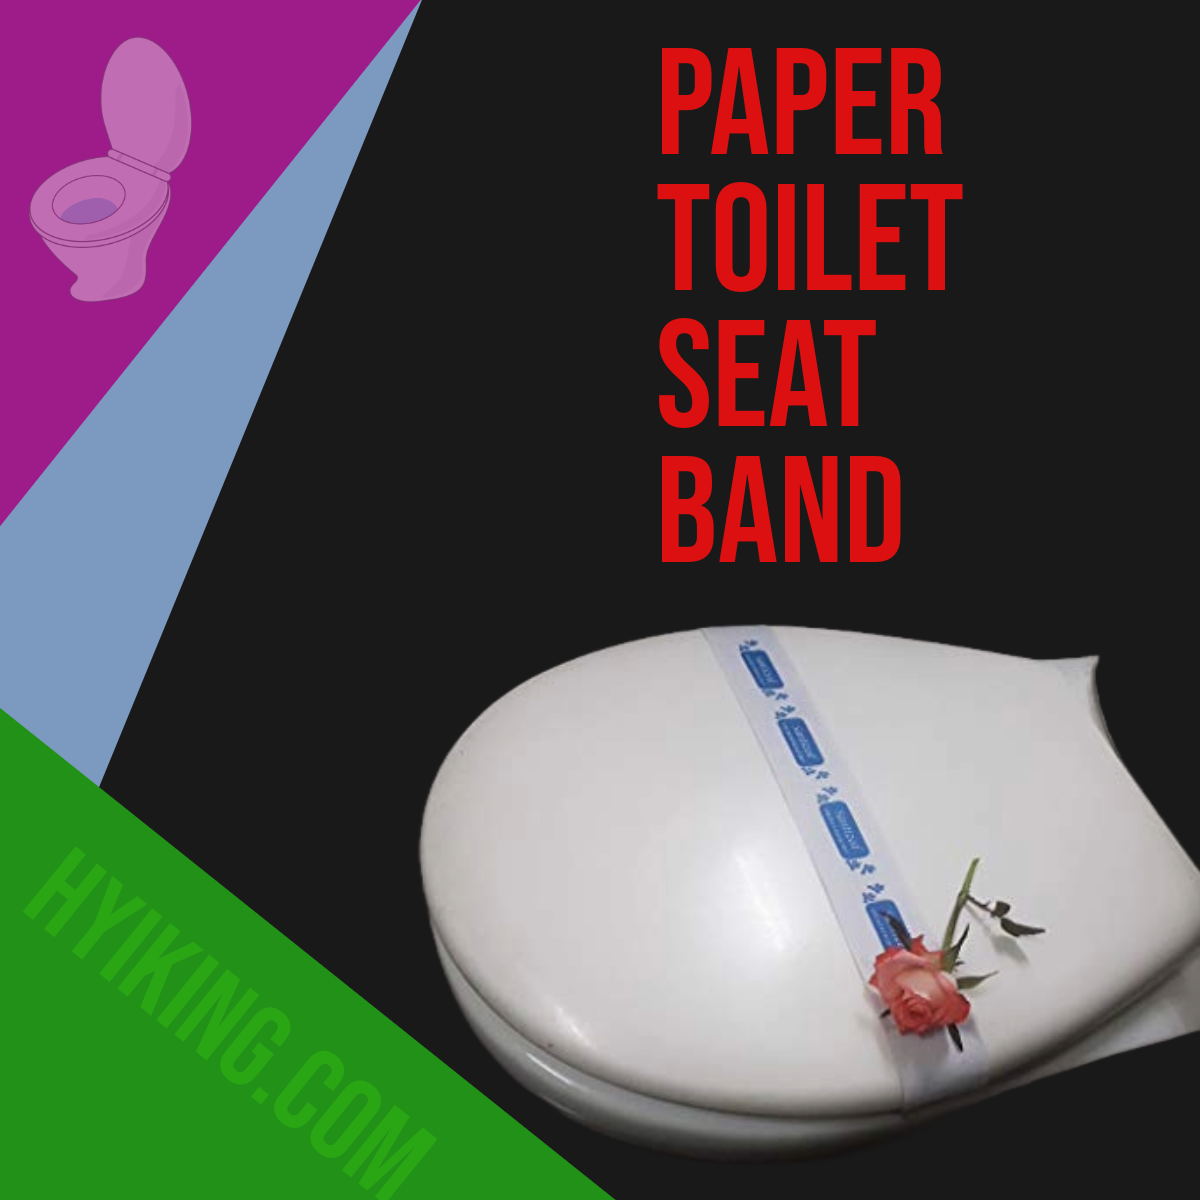 Boost Cleanliness Perception of hOTELS-Hospitals-by using- wc -Toilets band: Zicniccom's WC Seat Bands for Hospitality